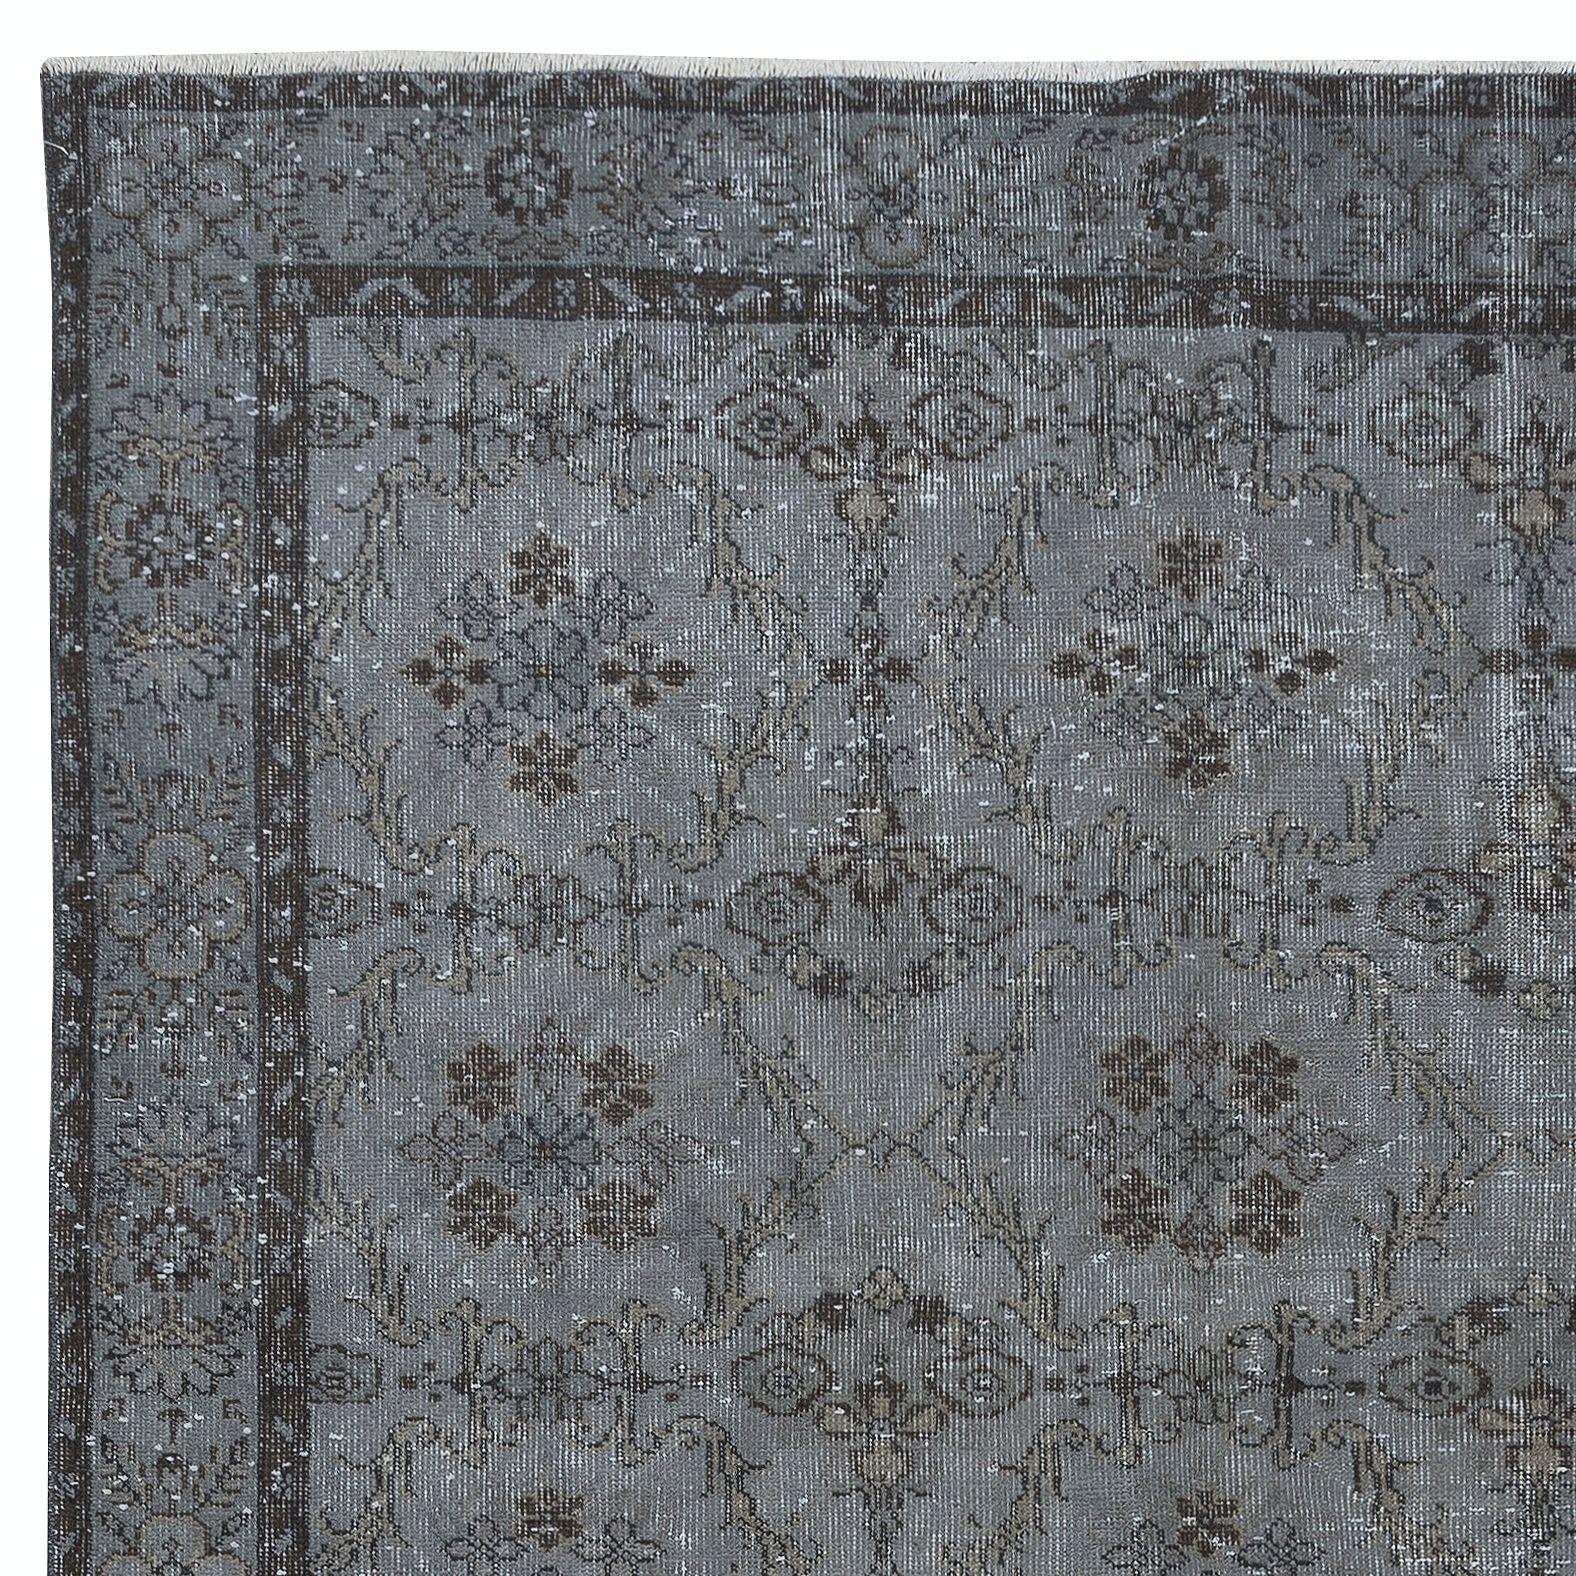 Hand-Woven 6.4x9.8 Ft Handmade Turkish Rug with Botanical Design and Gray Background For Sale